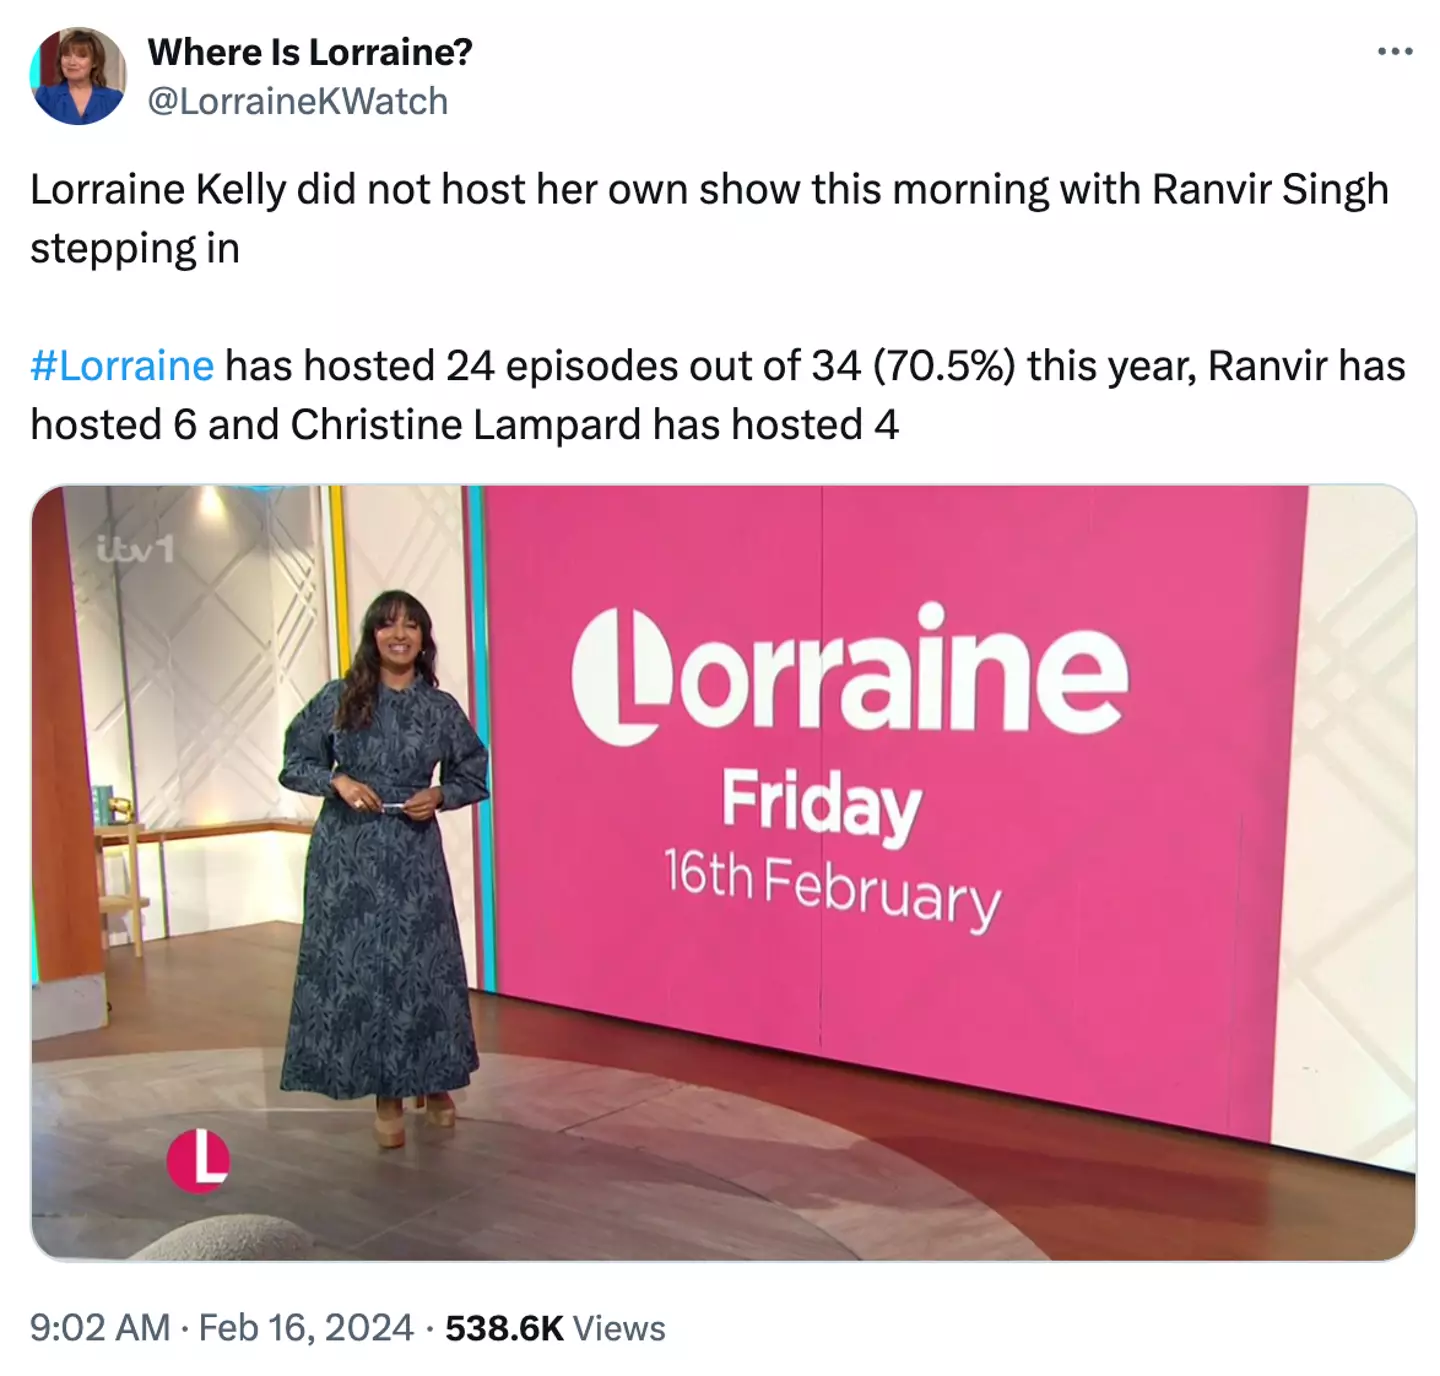 The account posts daily updates about who's hosting Lorraine.